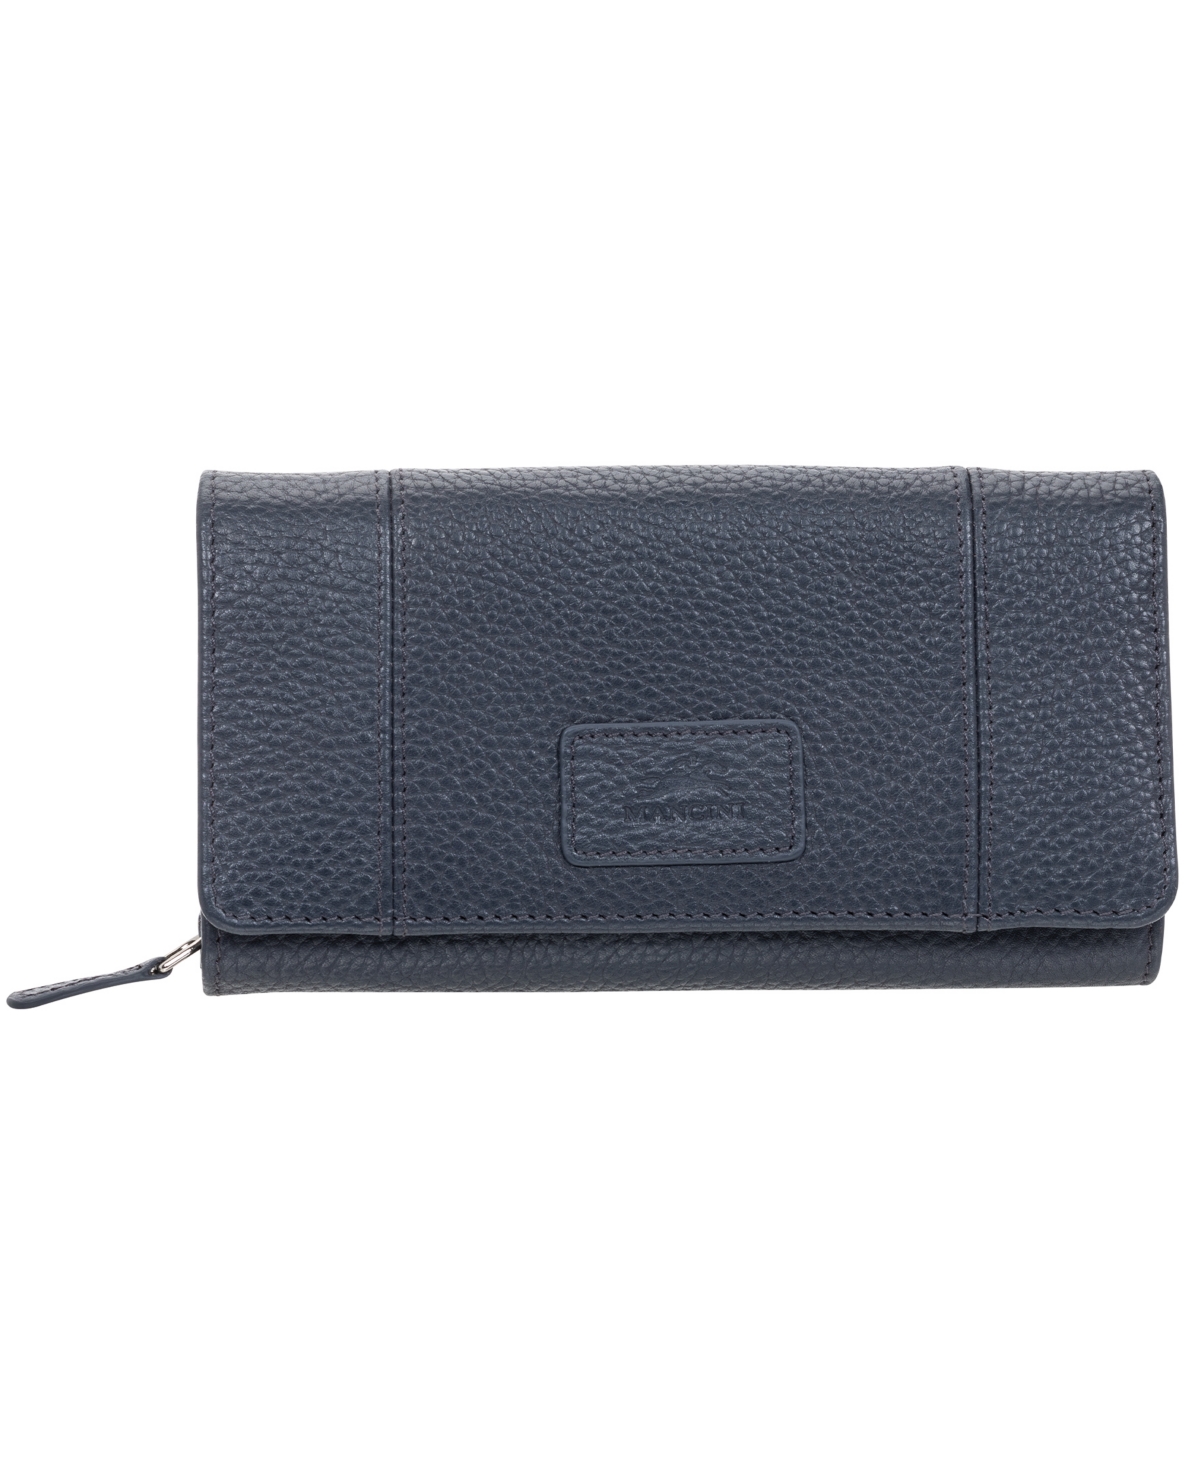 Women's Pebbled Collection Rfid Secure Mini Clutch Wallet - Navy